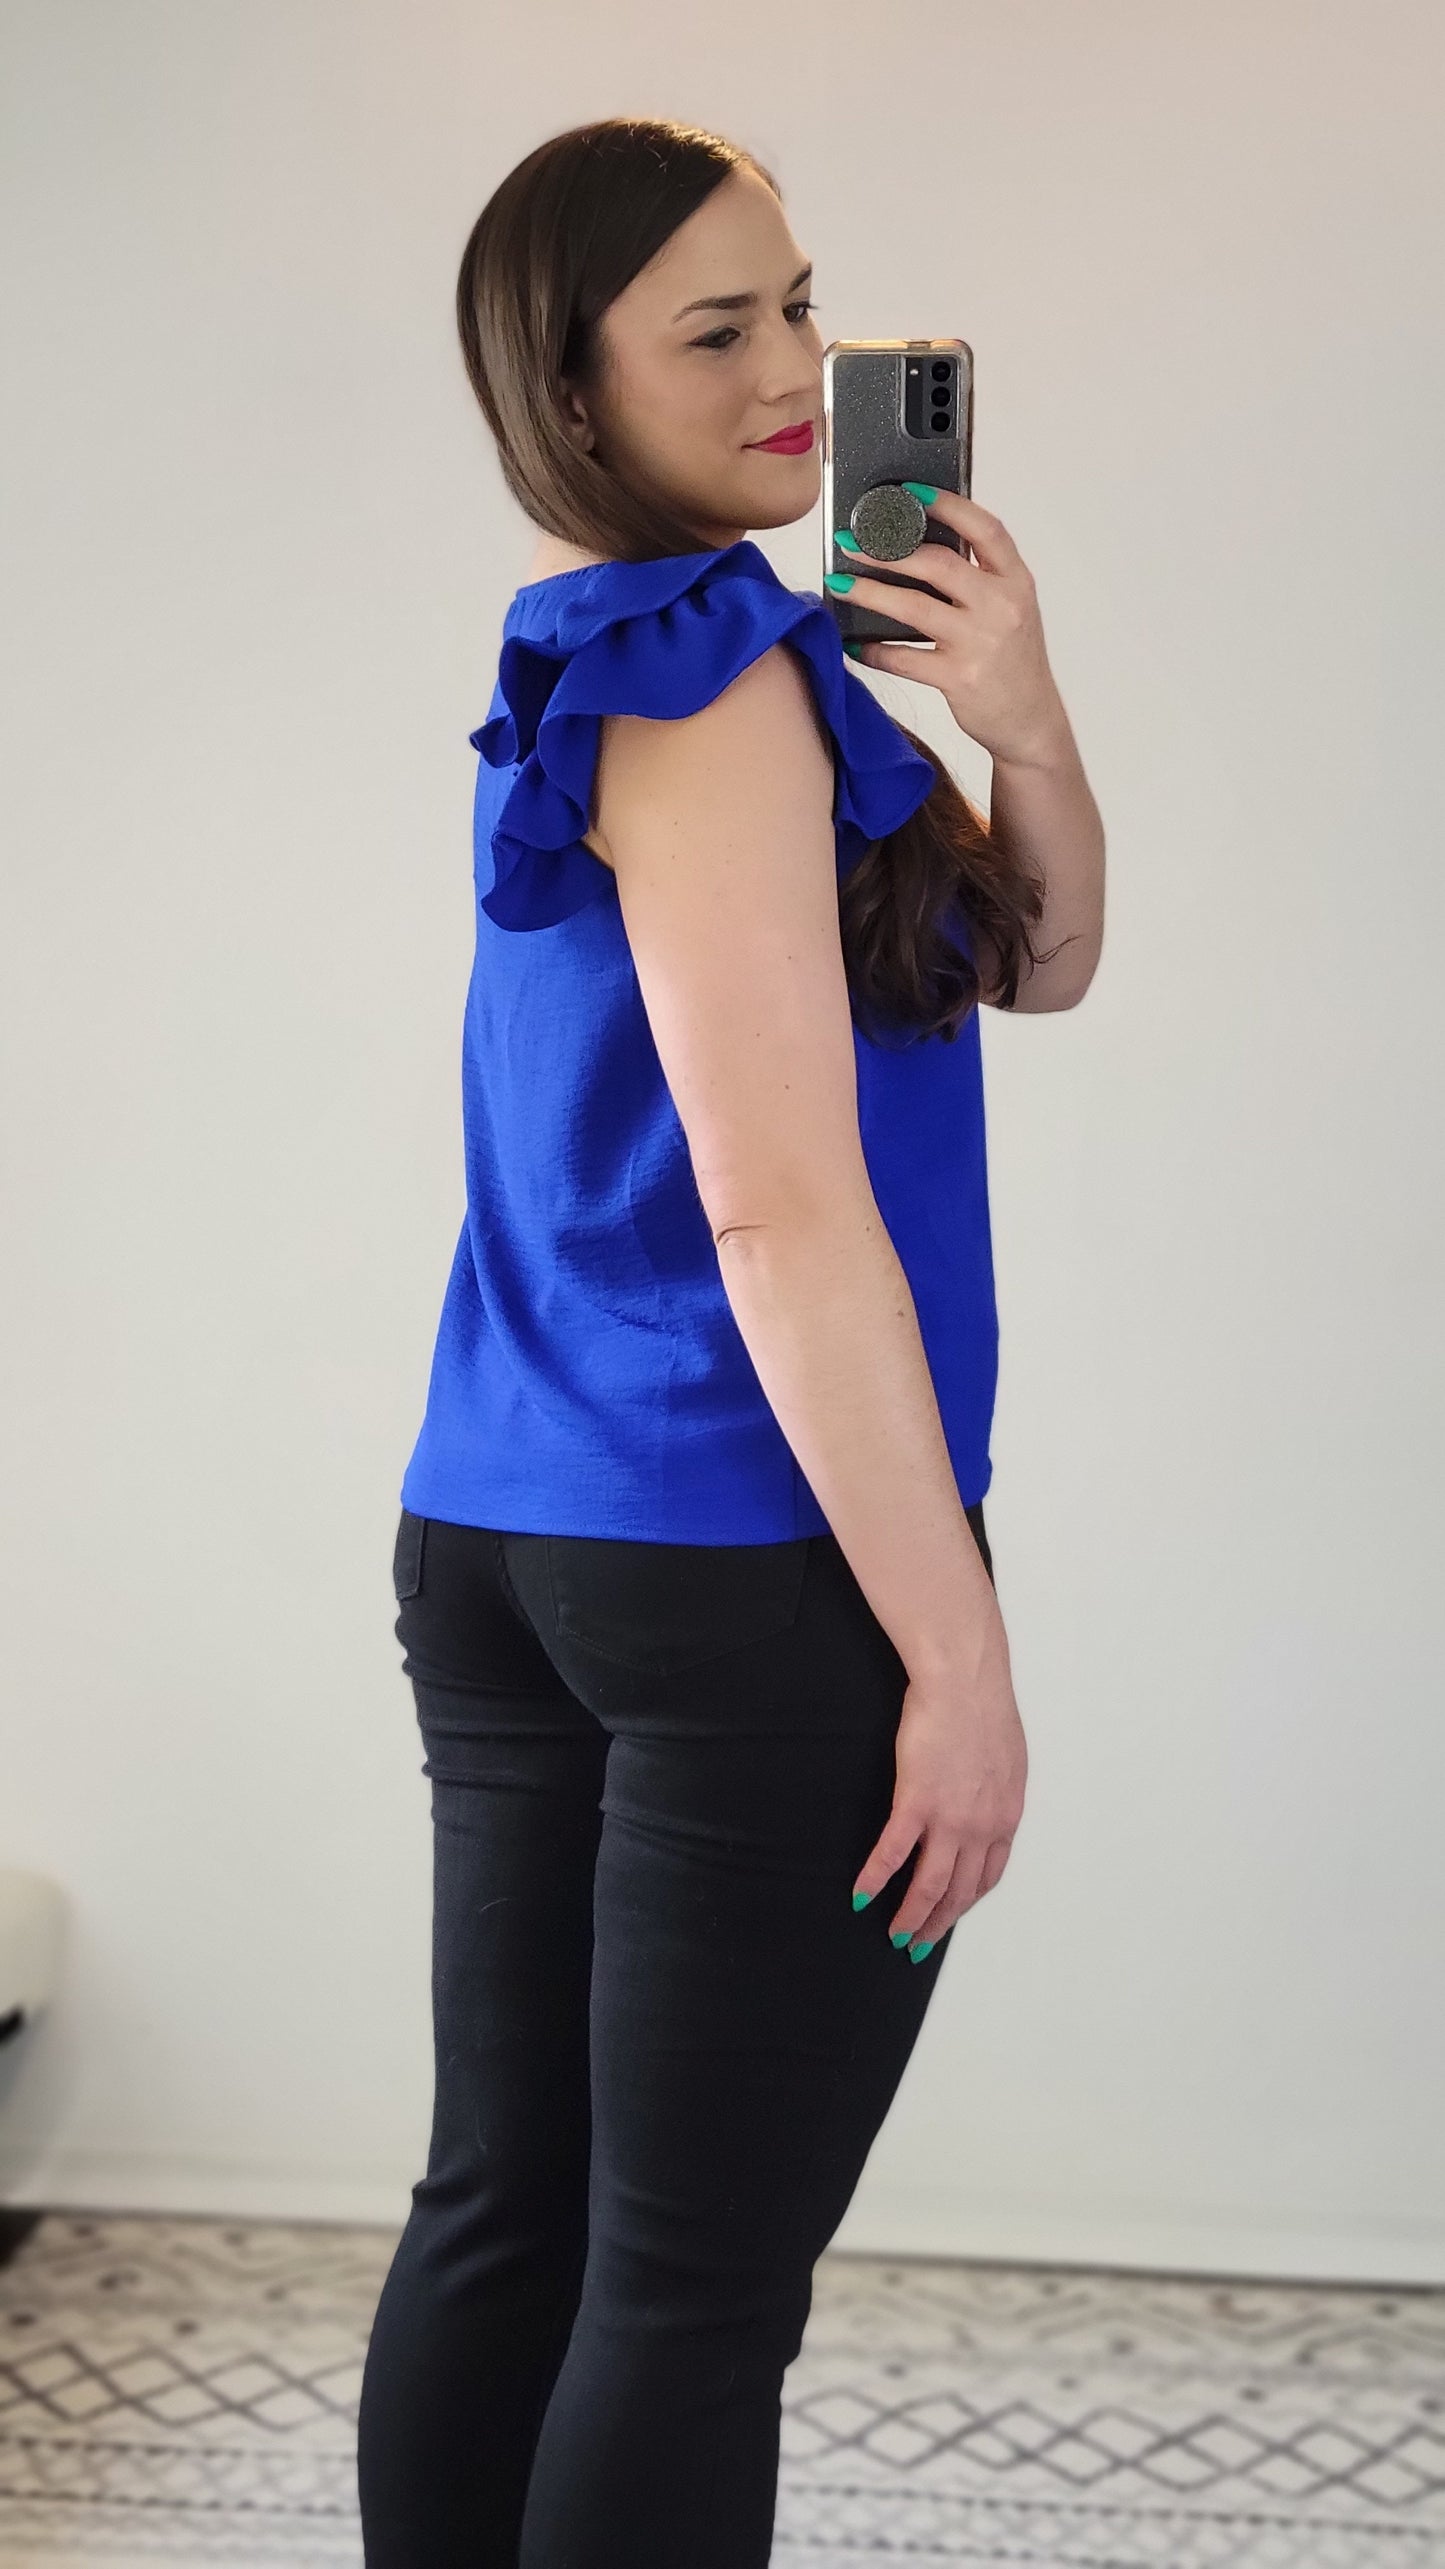 Royal Blue Airflow Top "Aly"